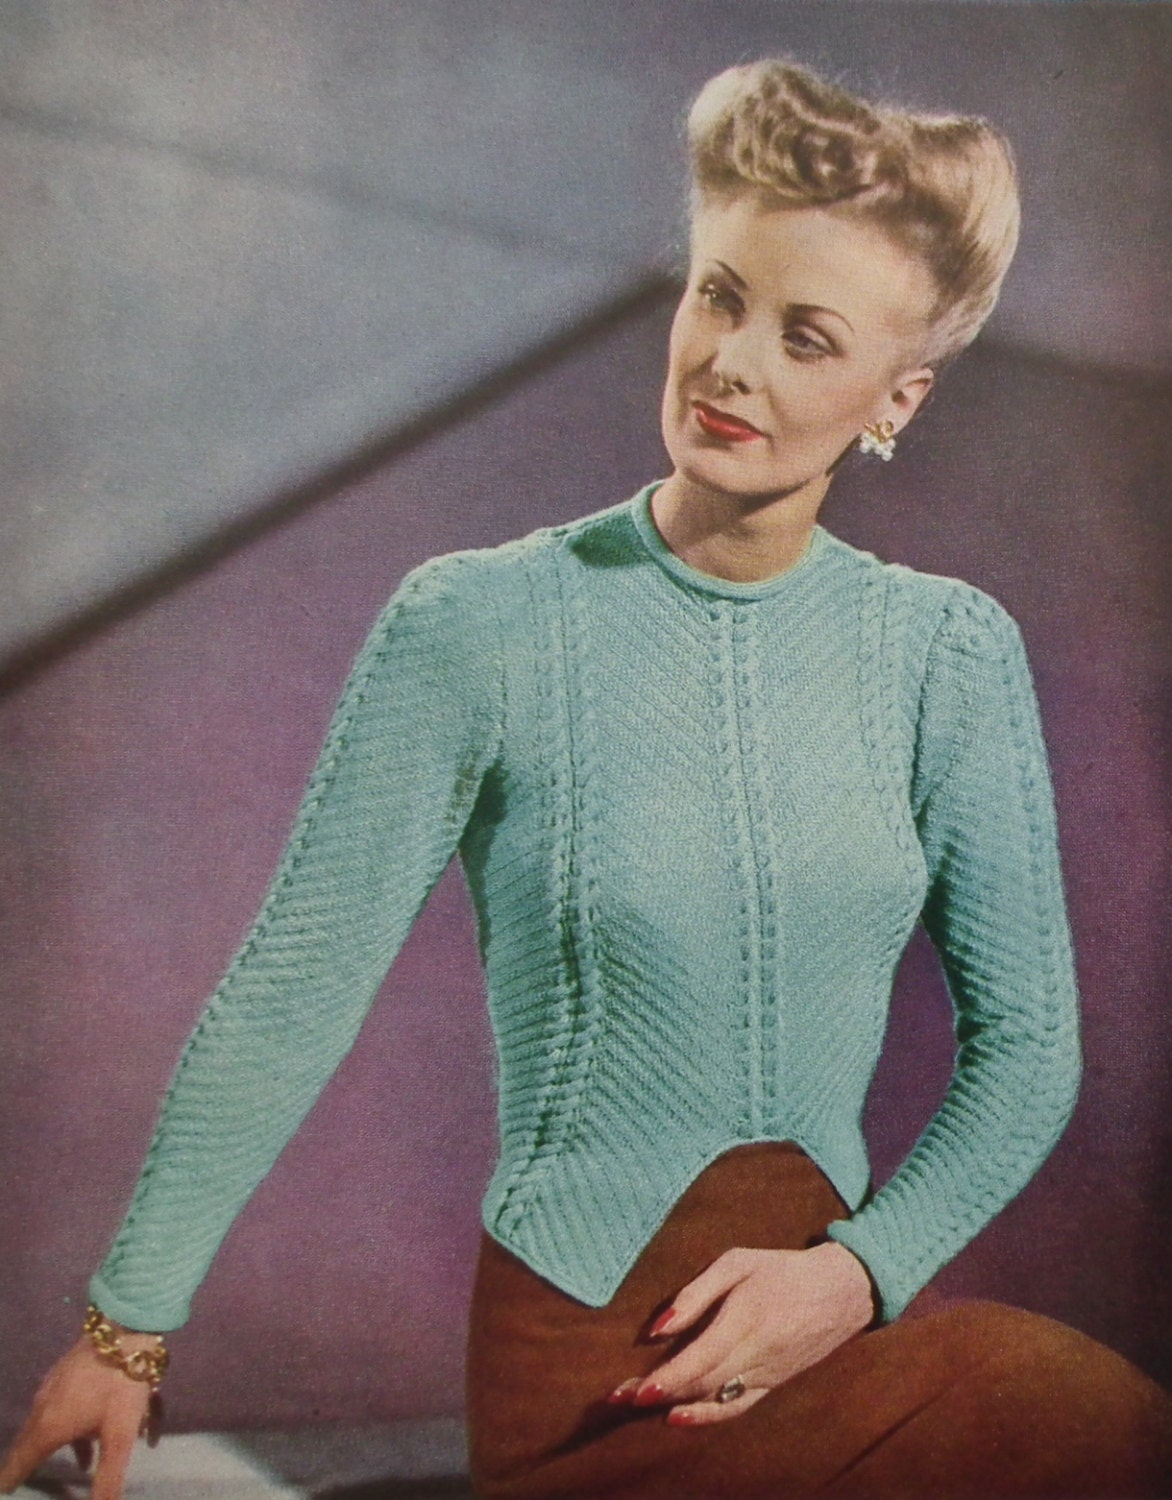 Sportswear in Knitting by Stitchcraft UK Vintage 40s 50s Knitting Book  Booklet 1940s 1950s Original Patterns Swim Suit Cardigans Jumpers Etc -   New Zealand